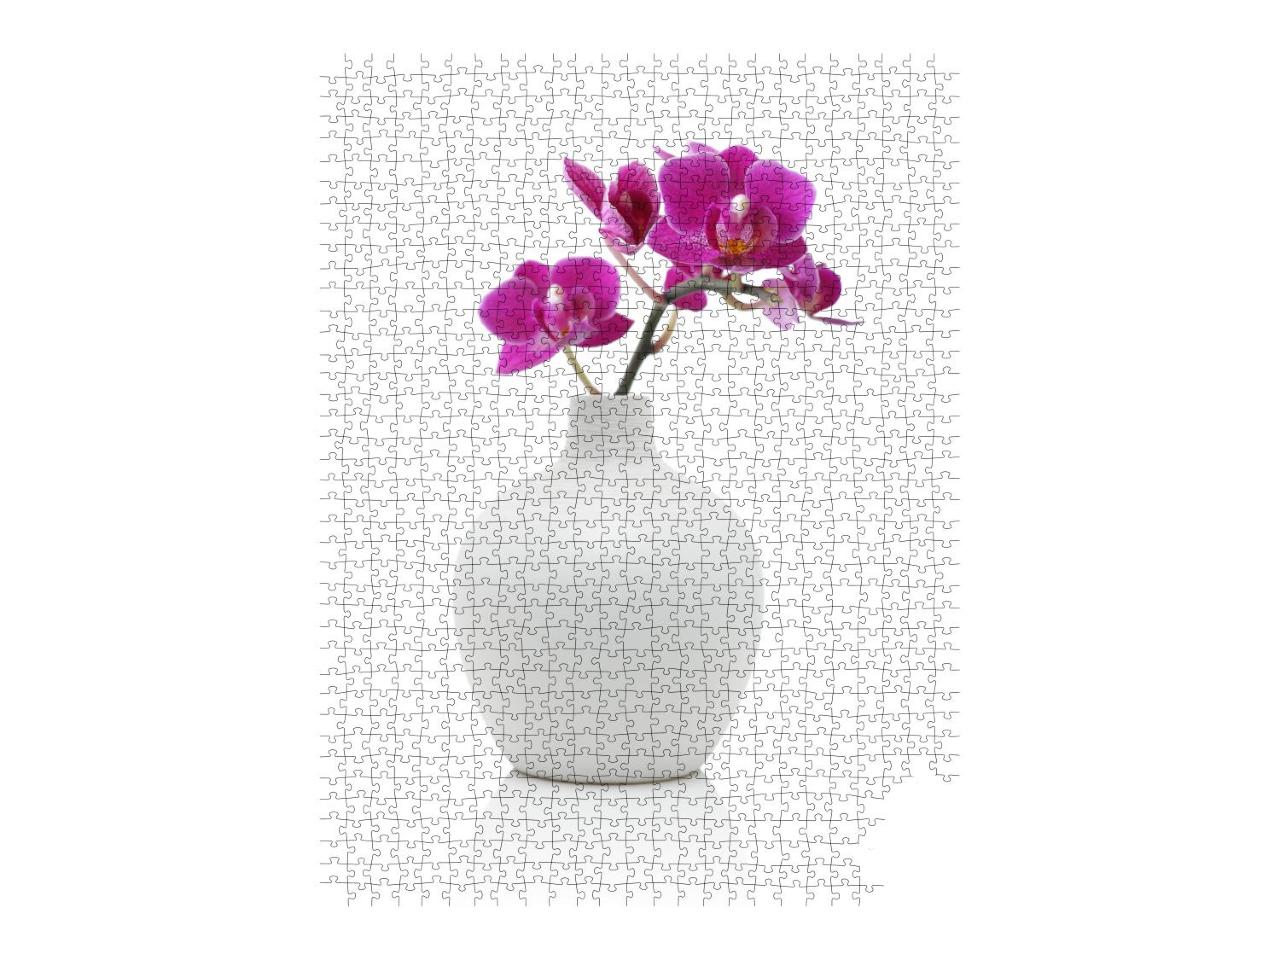 Puzzle 1000 Teile „Orchidee in weißer Vase“